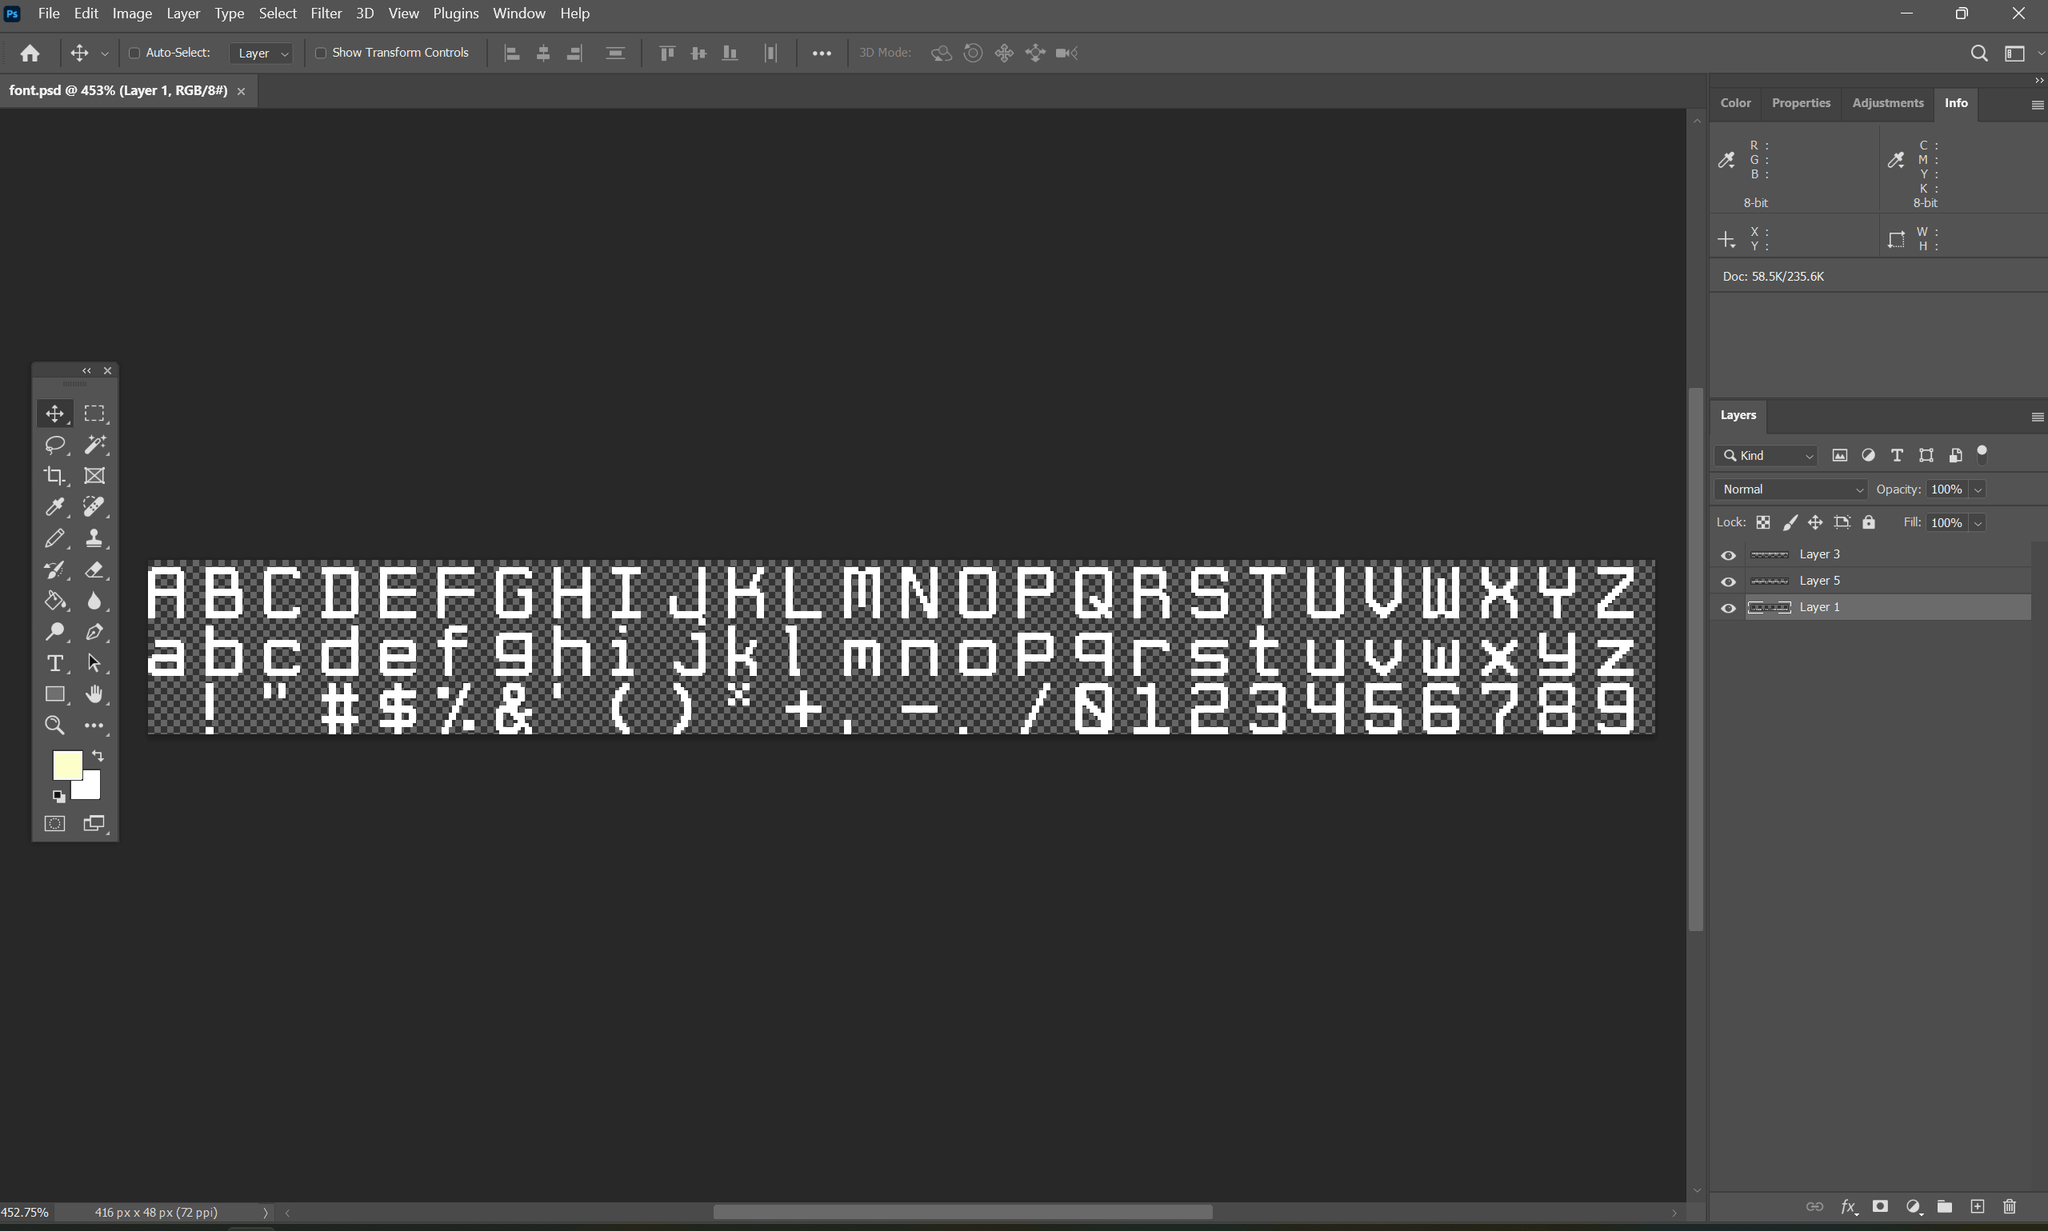 The font bitmap file is open in Photoshop.